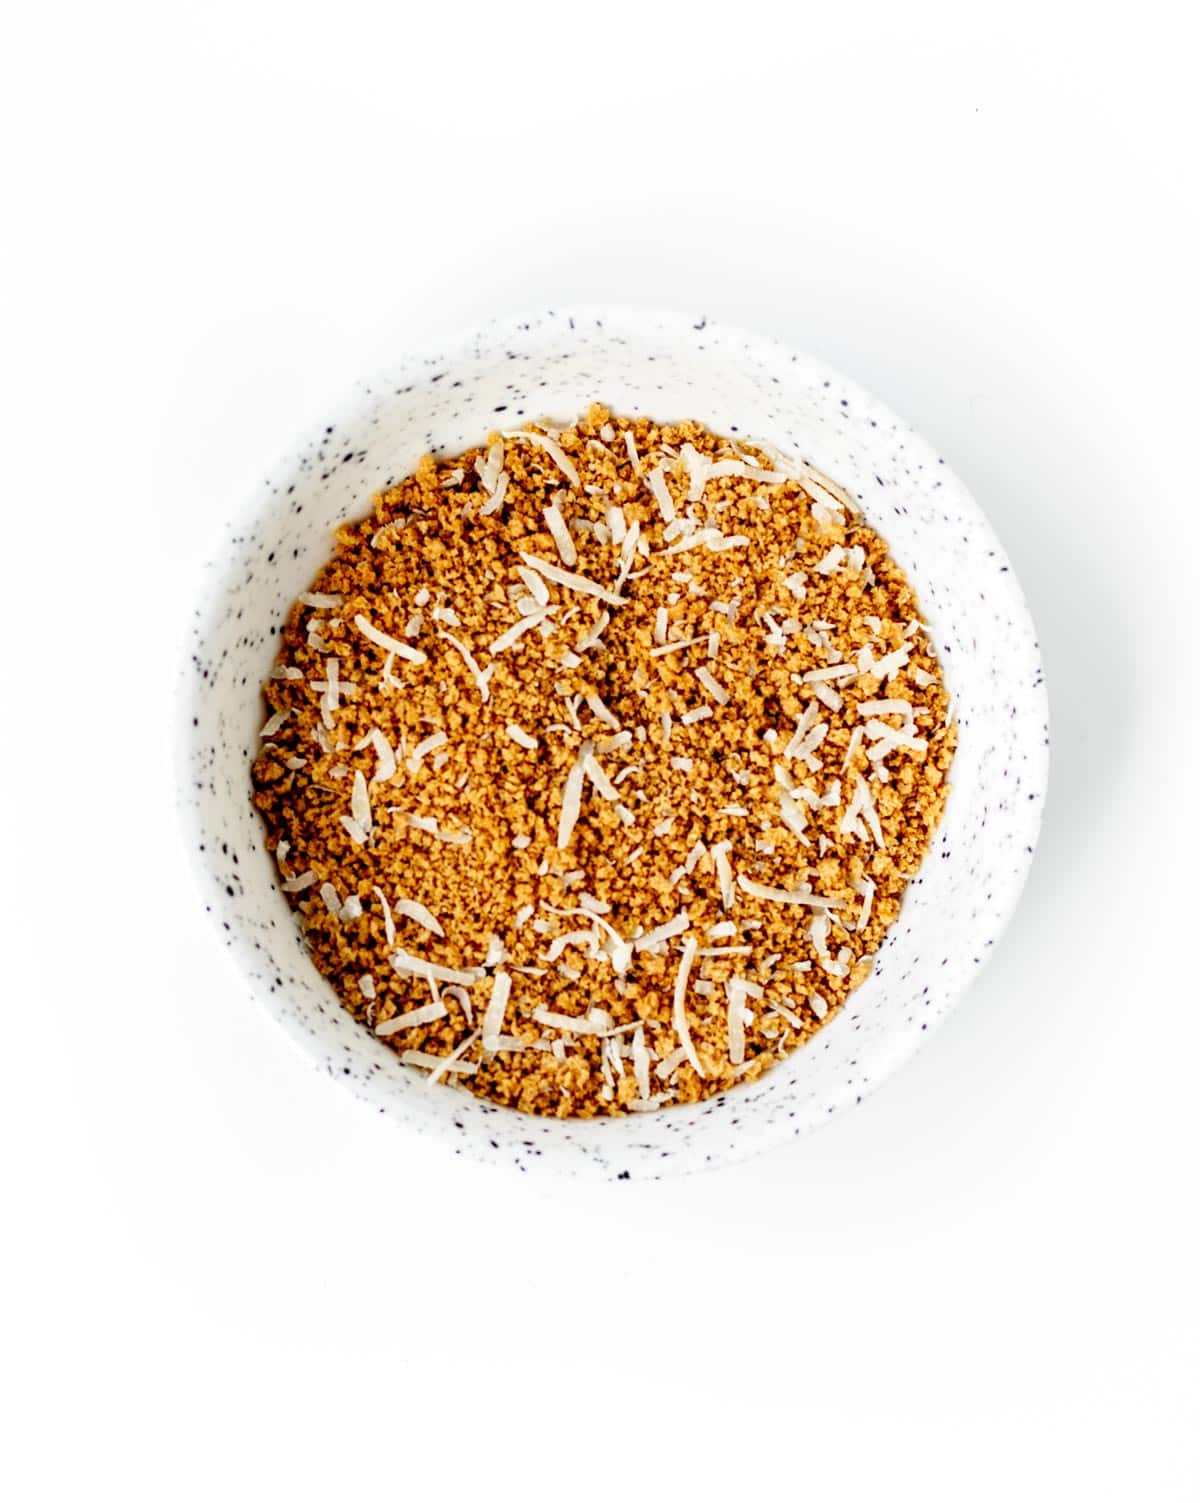 The breadcrumbs and parmesan cheese in a small bowl.